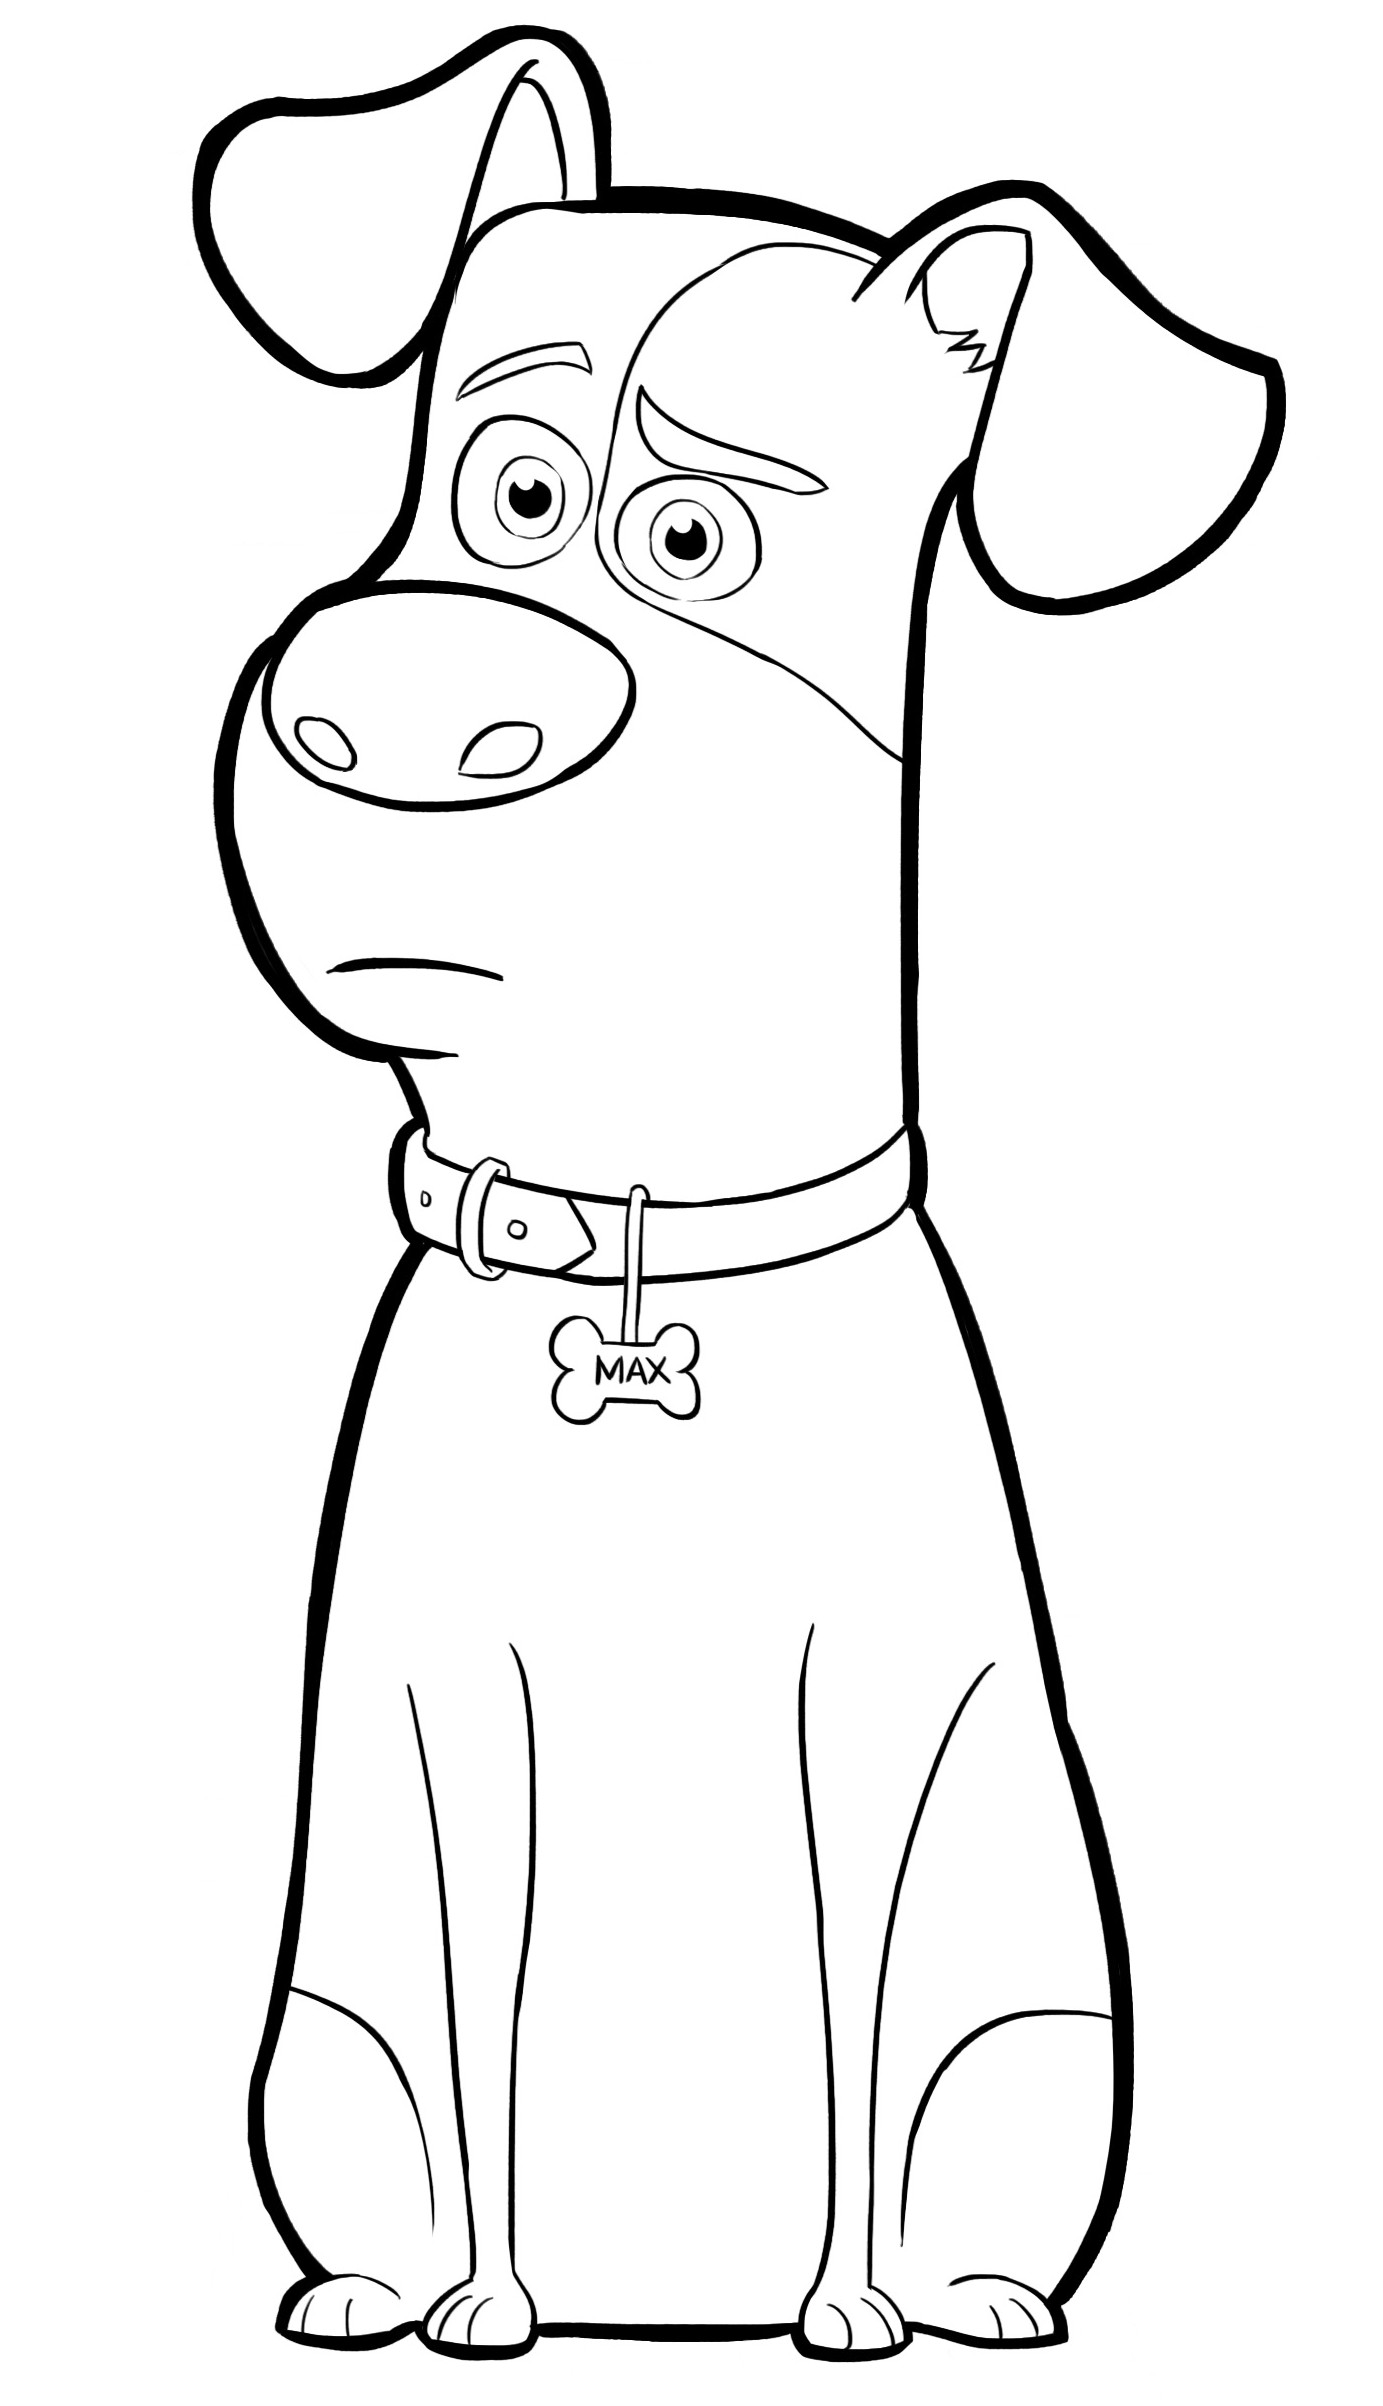 Printables Coloring Pages
 Pets Coloring Pages Best Coloring Pages For Kids